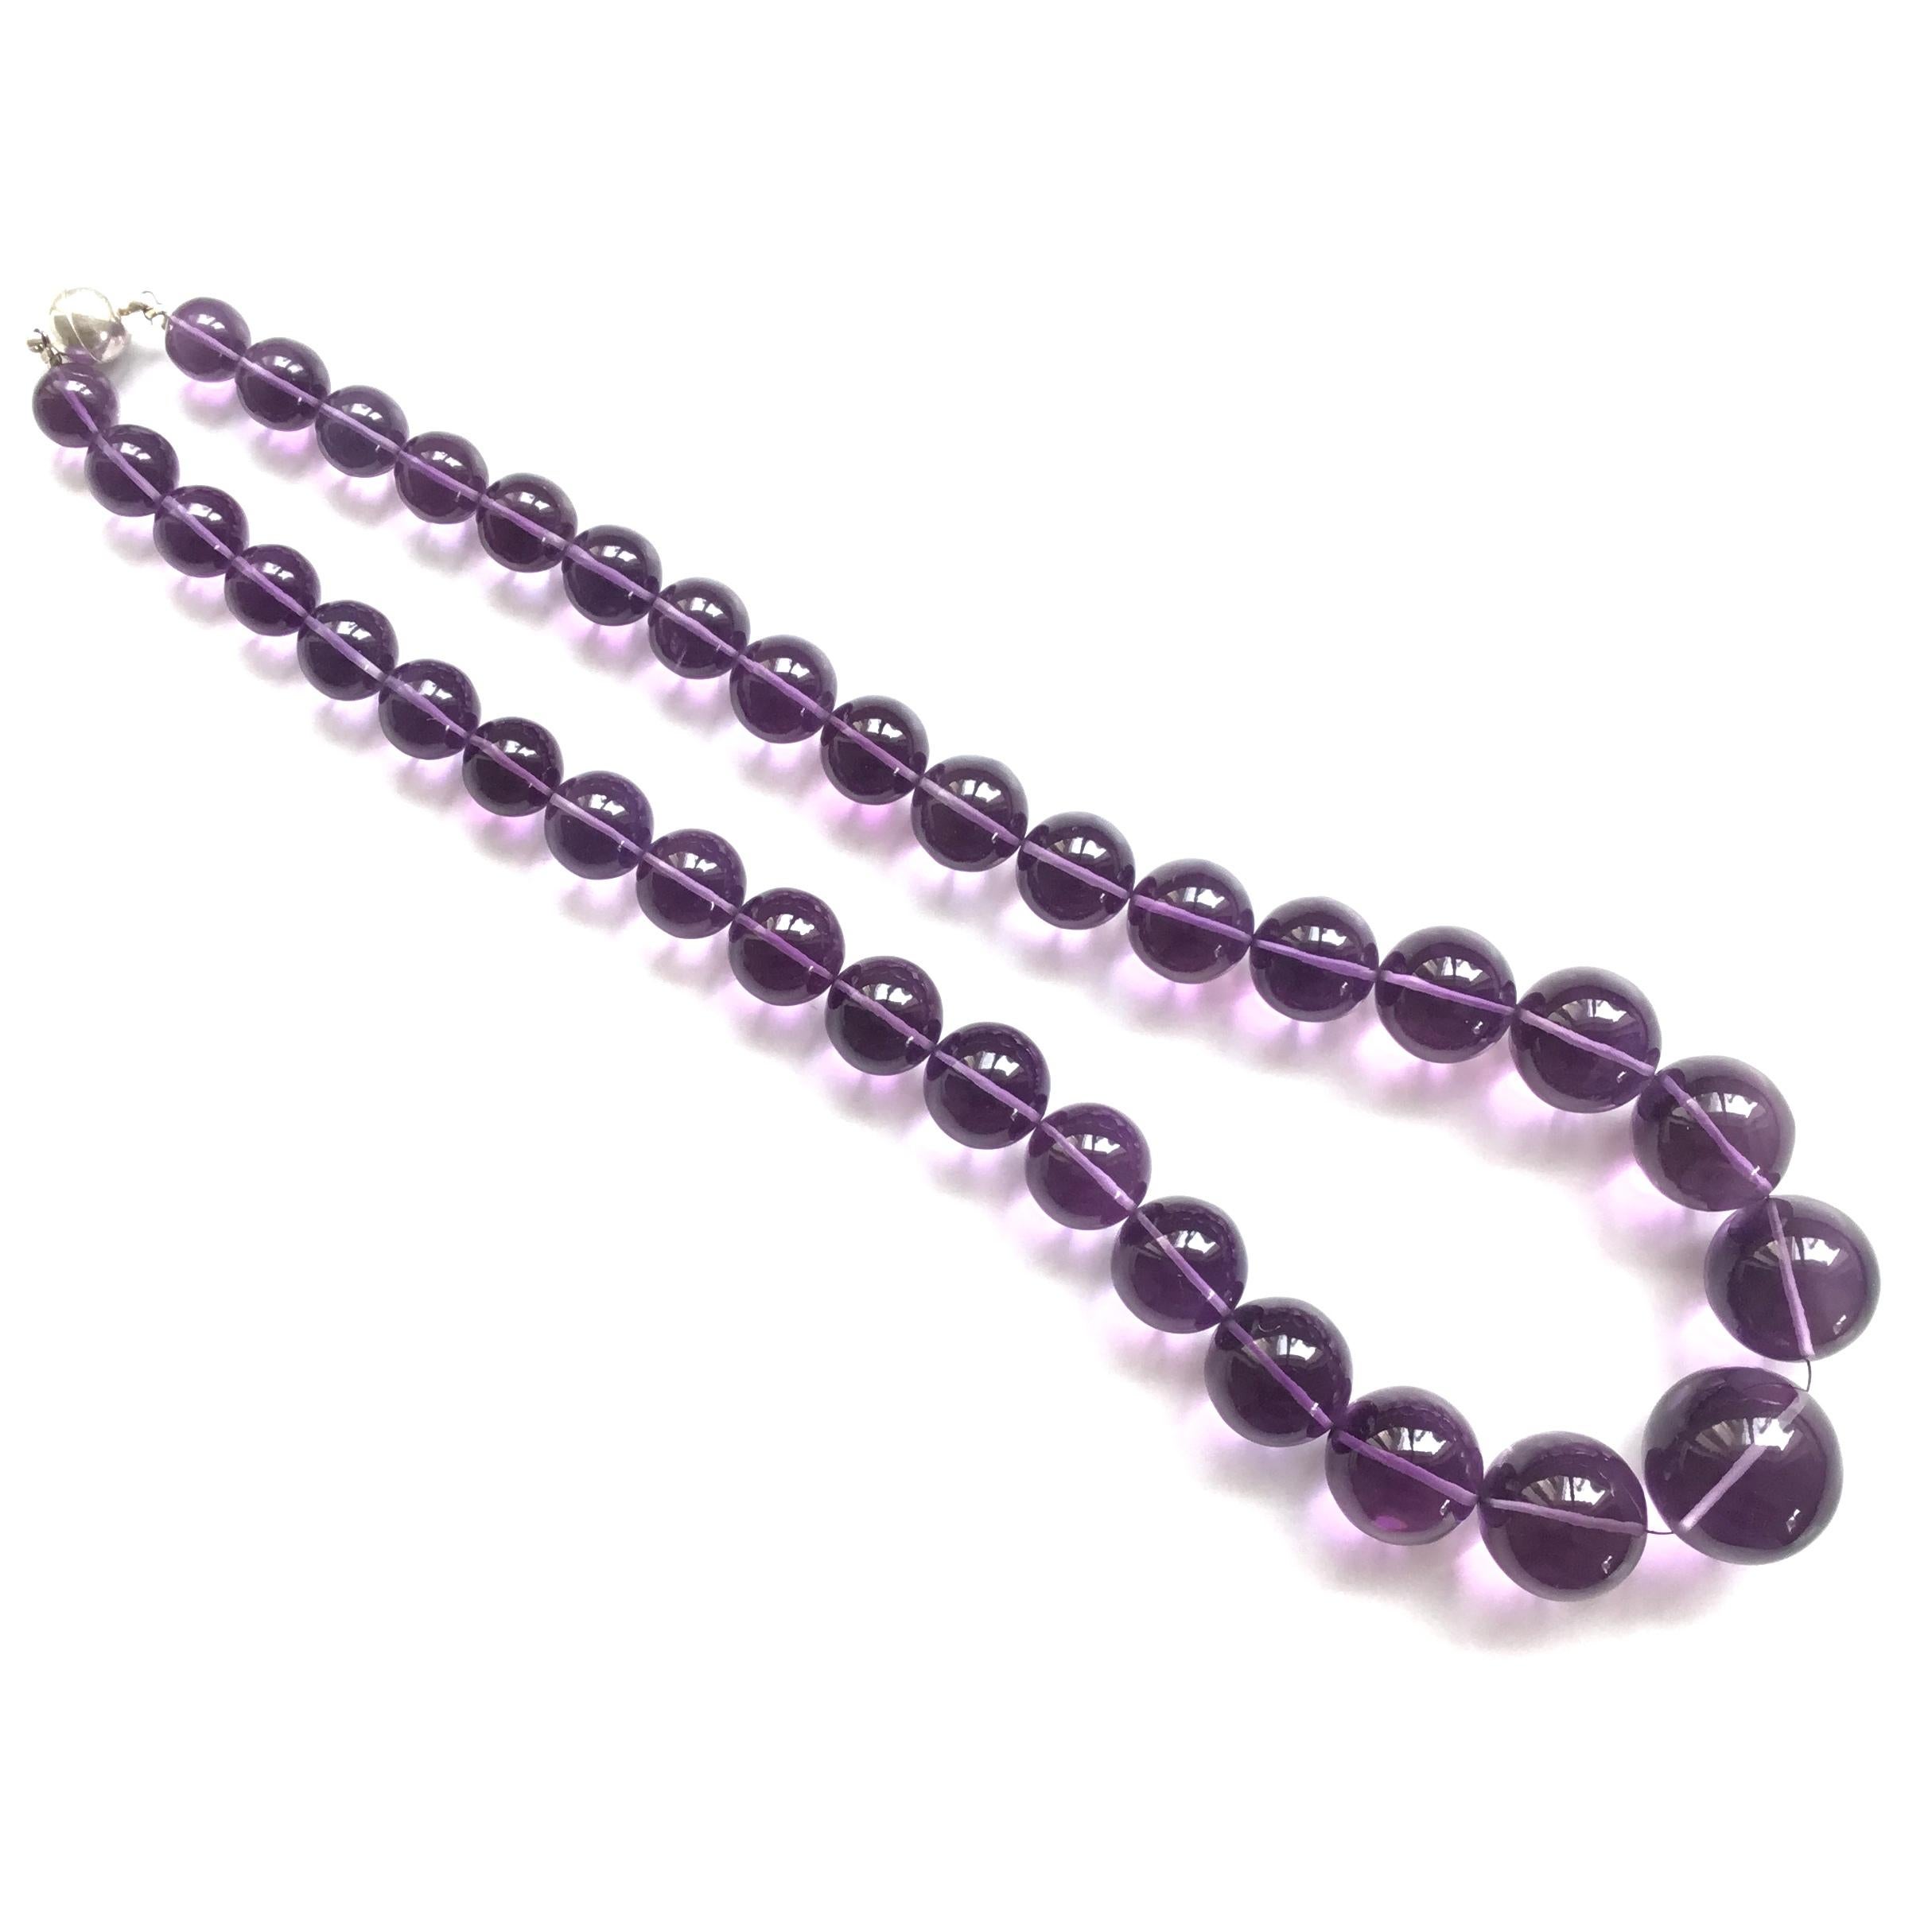 Top Quality Natural Amethyst Balls Beads Necklace Loupe Clean Gemstone
Size : 10 To 22 MM Beads
Weight : 744.45 Carats
Length Of Necklace : 16 Inches